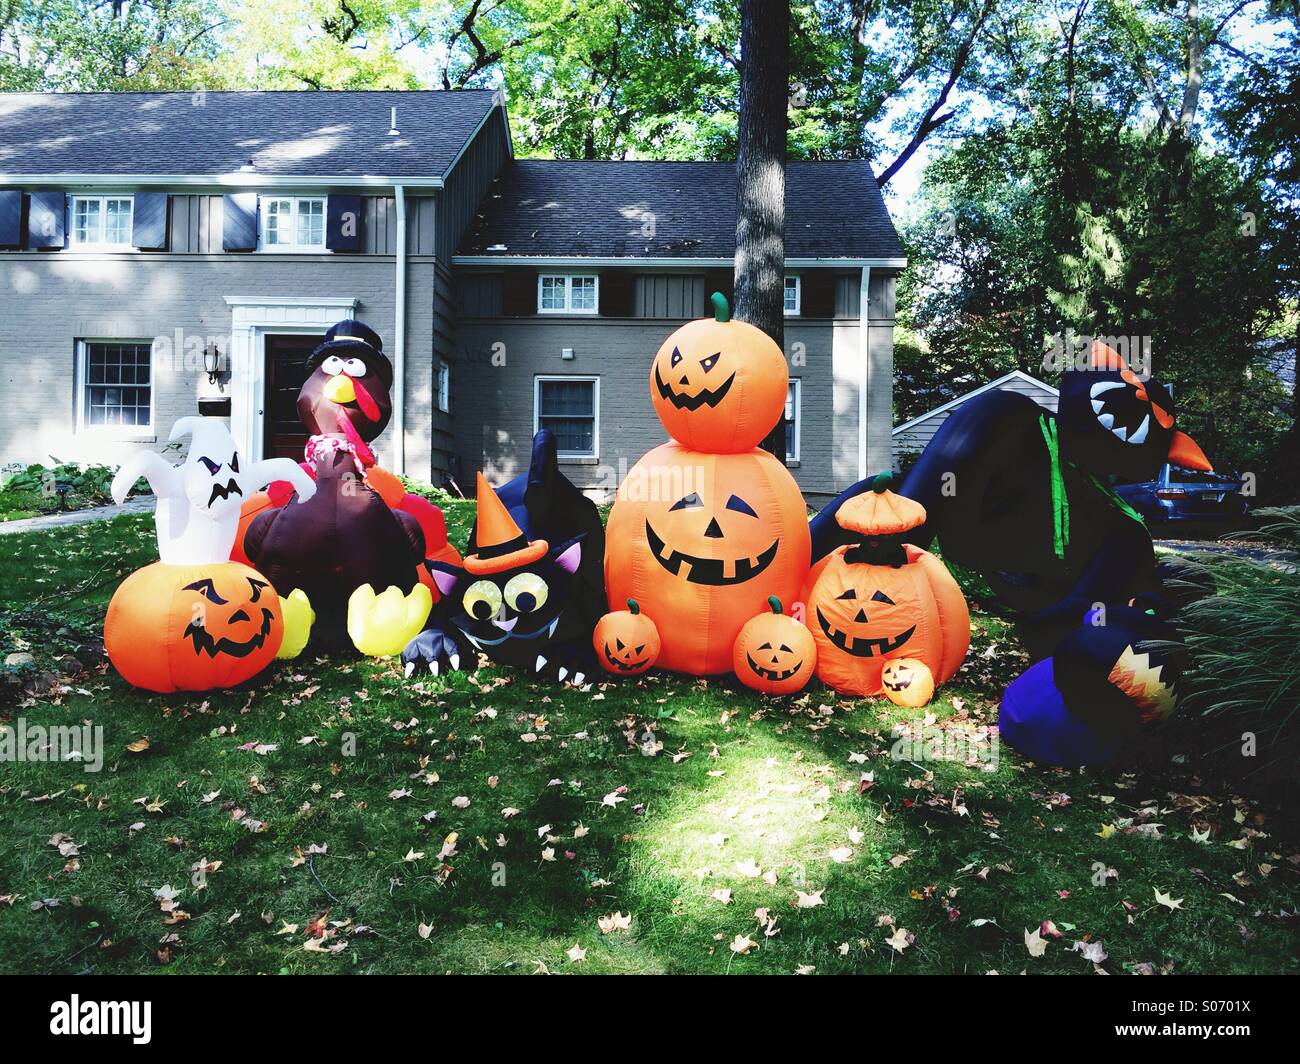 A halloween display on a lawn in front of a house in New Jersey, with crazy decorations. Stock Photo